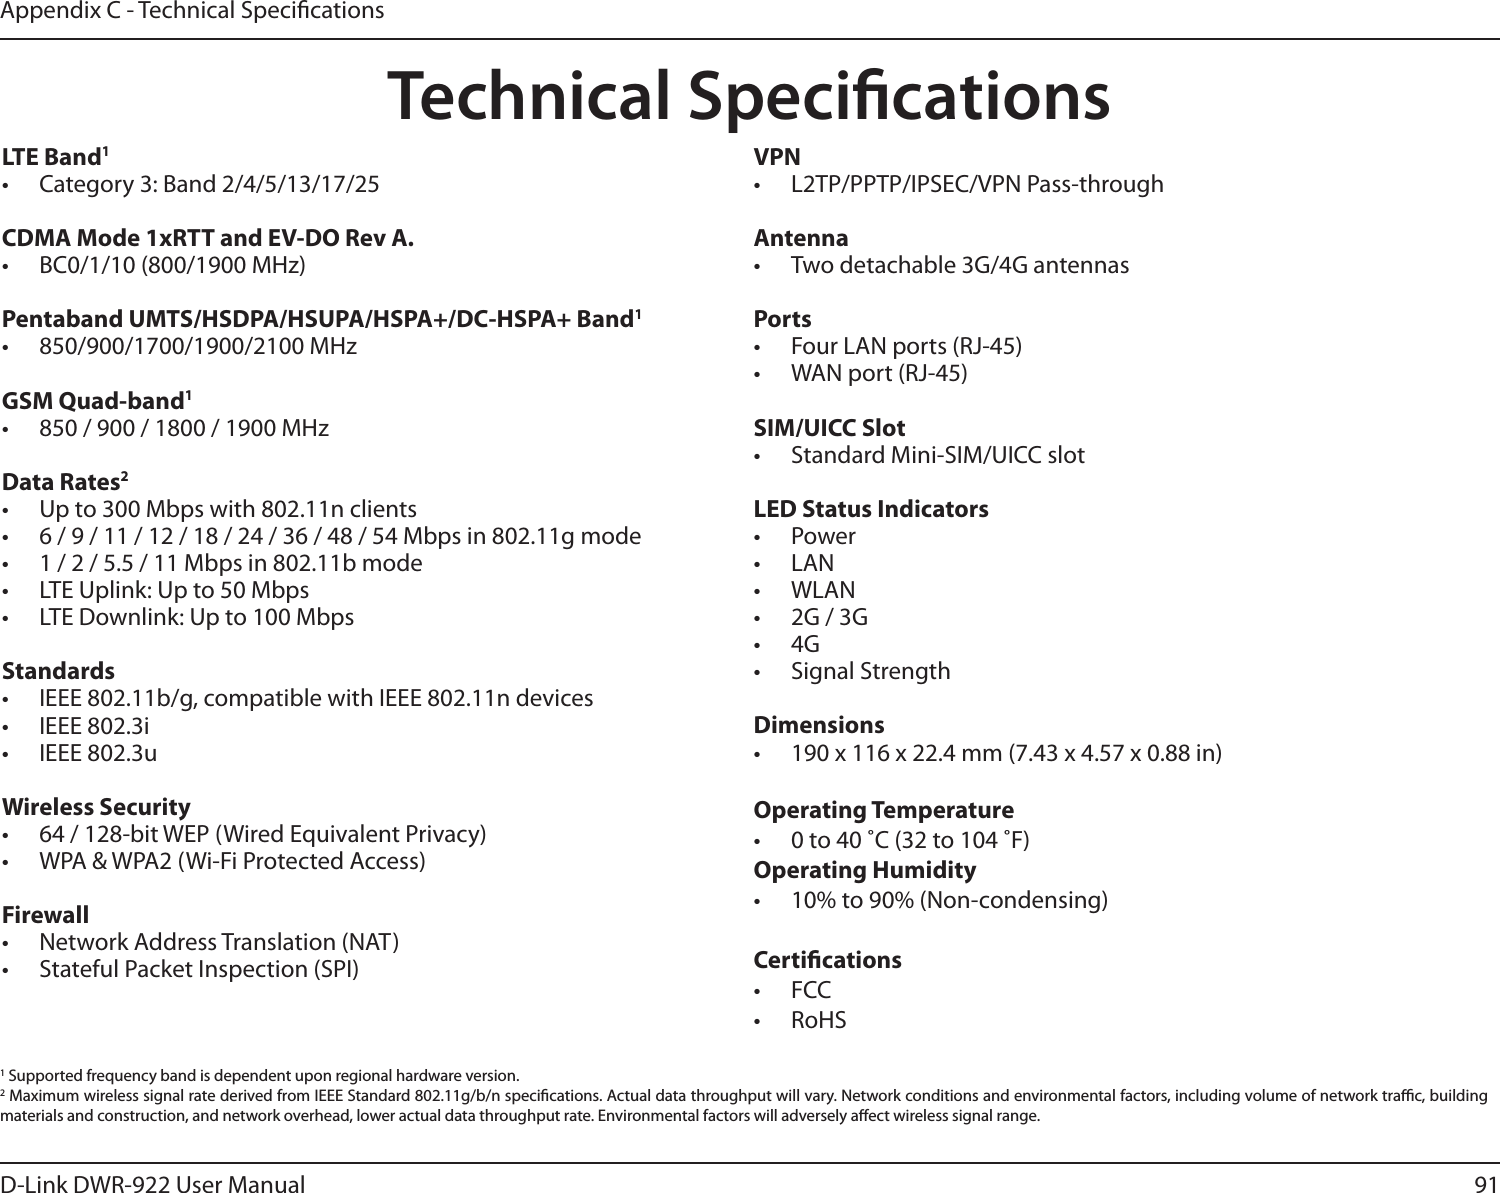 91D-Link DWR-922 User ManualAppendix C - Technical SpecicationsTechnical SpecicationsLTE Band1•  Category 3: Band 2/4/5/13/17/25CDMA Mode 1xRTT and EV-DO Rev A.•  BC0/1/10 (800/1900 MHz)Pentaband UMTS/HSDPA/HSUPA/HSPA+/DC-HSPA+ Band1•  850/900/1700/1900/2100 MHzGSM Quad-band1•  850 / 900 / 1800 / 1900 MHzData Rates2•  Up to 300 Mbps with 802.11n clients•  6 / 9 / 11 / 12 / 18 / 24 / 36 / 48 / 54 Mbps in 802.11g mode•  1 / 2 / 5.5 / 11 Mbps in 802.11b mode•  LTE Uplink: Up to 50 Mbps•  LTE Downlink: Up to 100 MbpsStandards•  IEEE 802.11b/g, compatible with IEEE 802.11n devices•  IEEE 802.3i•  IEEE 802.3uWireless Security•  64 / 128-bit WEP (Wired Equivalent Privacy)•  WPA &amp; WPA2 (Wi-Fi Protected Access)Firewall•  Network Address Translation (NAT)•  Stateful Packet Inspection (SPI)VPN•  L2TP/PPTP/IPSEC/VPN Pass-throughAntenna•  Two detachable 3G/4G antennasPorts•  Four LAN ports (RJ-45)•  WAN port (RJ-45)SIM/UICC Slot•  Standard Mini-SIM/UICC slotLED Status Indicators•  Power•  LAN•  WLAN•  2G / 3G•  4G•  Signal StrengthDimensions•  190 x 116 x 22.4 mm (7.43 x 4.57 x 0.88 in)Operating Temperature•  0 to 40 ˚C (32 to 104 ˚F)Operating Humidity•  10% to 90% (Non-condensing)Certications•  FCC •  RoHS1 Supported frequency band is dependent upon regional hardware version.2 Maximum wireless signal rate derived from IEEE Standard 802.11g/b/n specications. Actual data throughput will vary. Network conditions and environmental factors, including volume of network trac, building materials and construction, and network overhead, lower actual data throughput rate. Environmental factors will adversely aect wireless signal range.